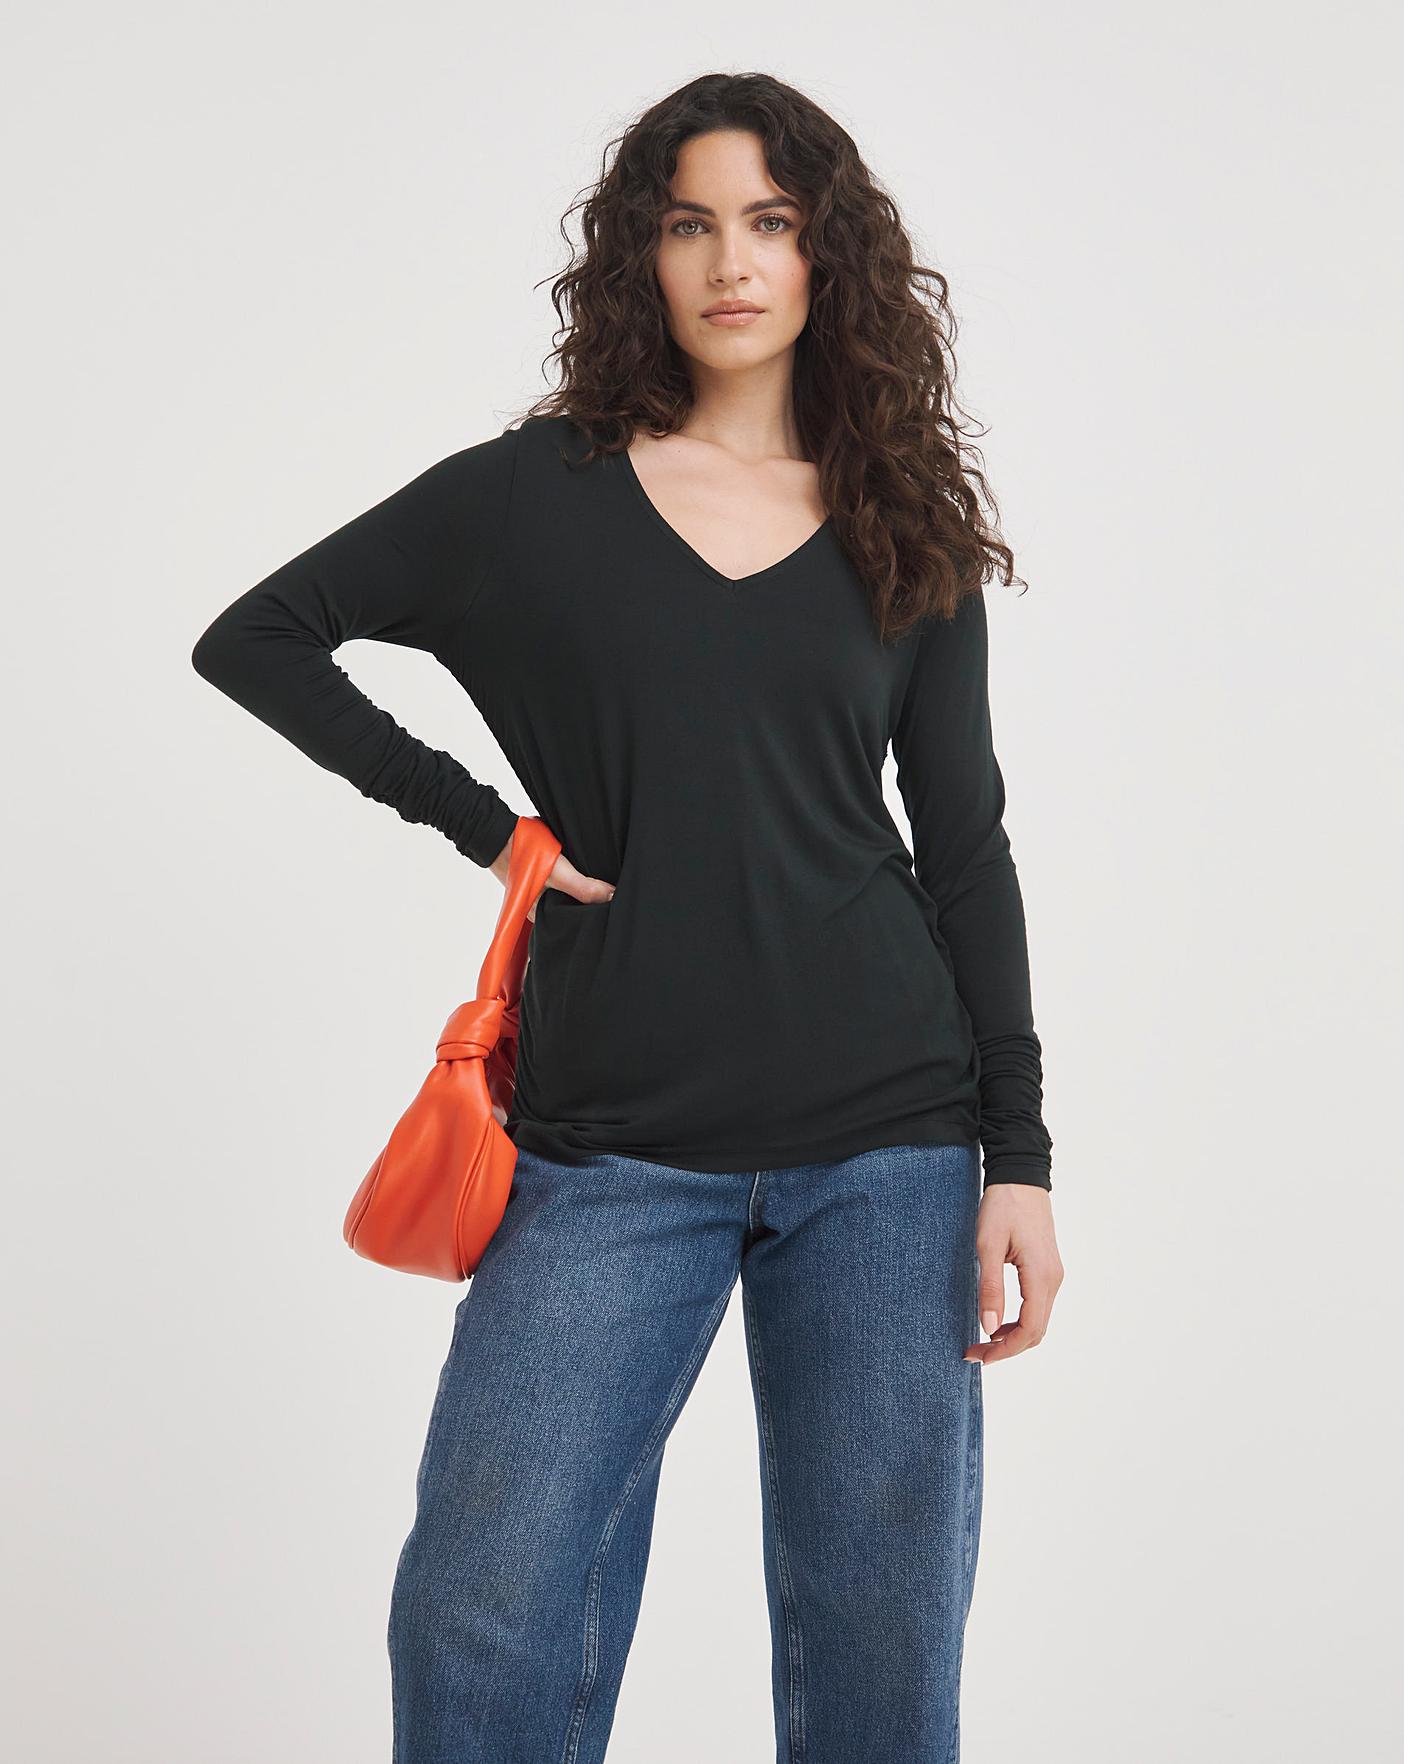 Pieces ruched side t-shirt in black